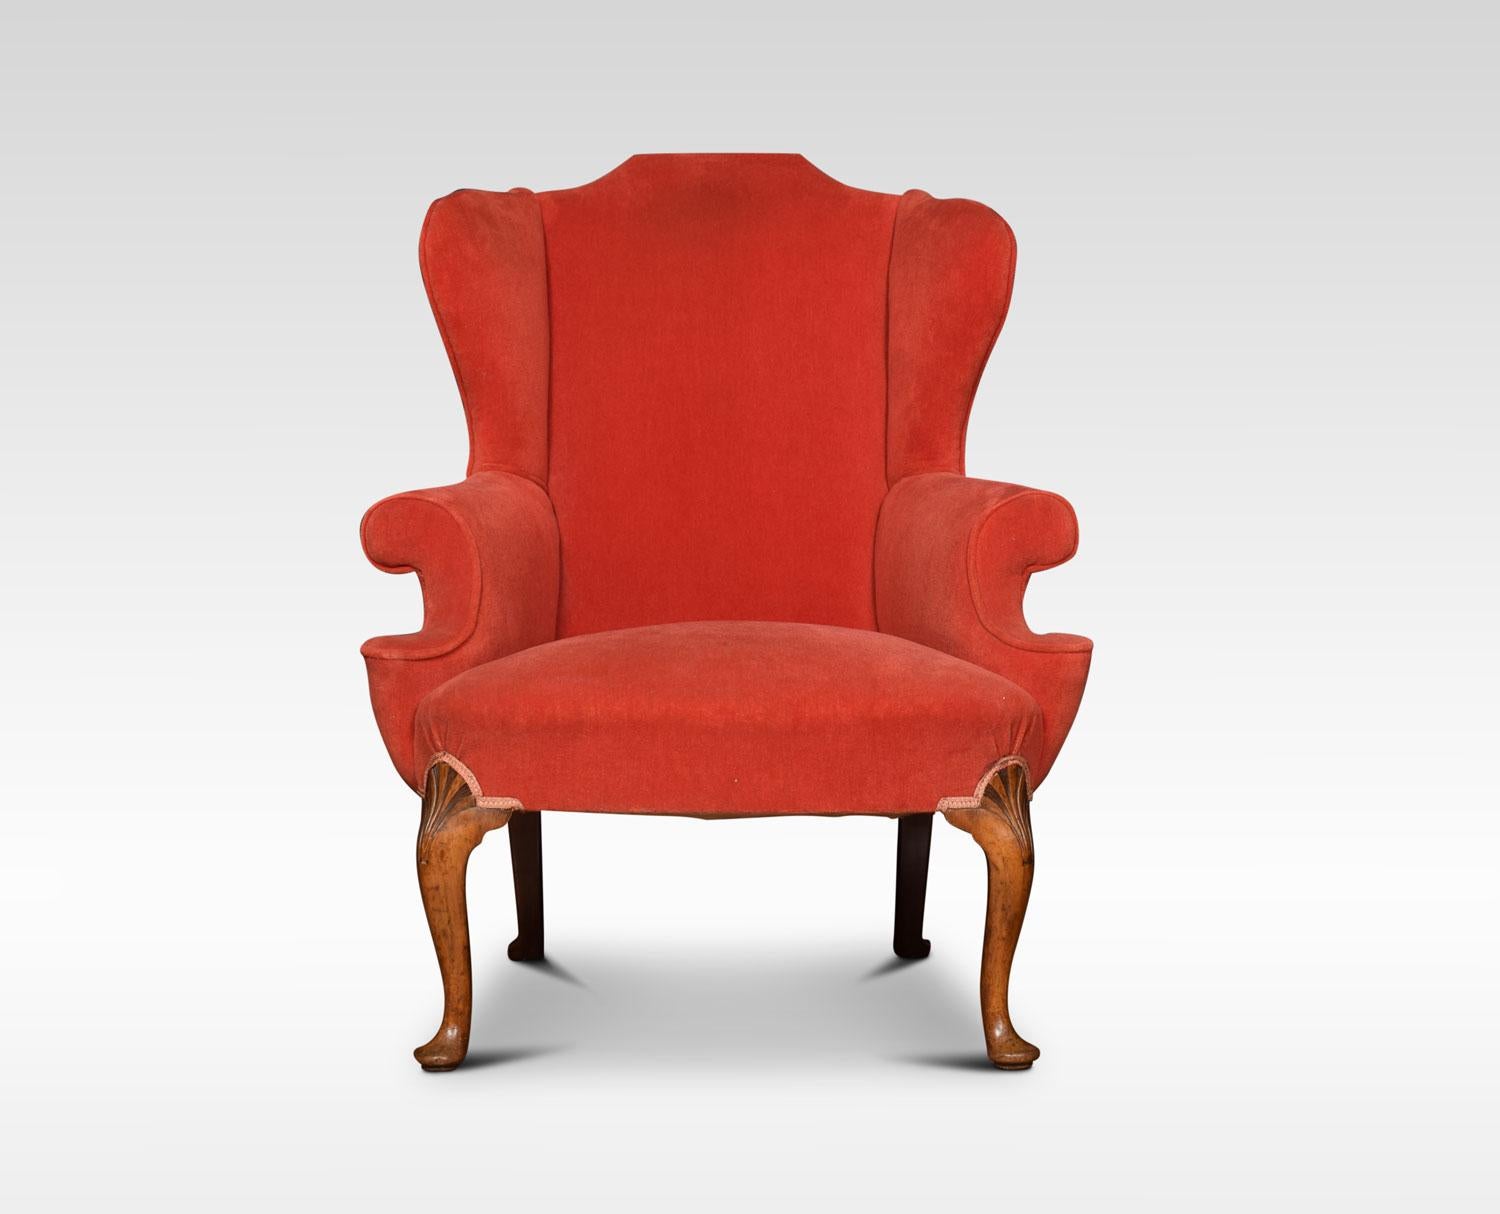 Pair of George I style wing armchairs upholstered in red fabric, raised up on shell carved cabriole front legs, terminating in pad feet.
Dimensions:
Height 42 inches, height to seat 18 inches
Width 32 inches
Depth 32.5 inches.